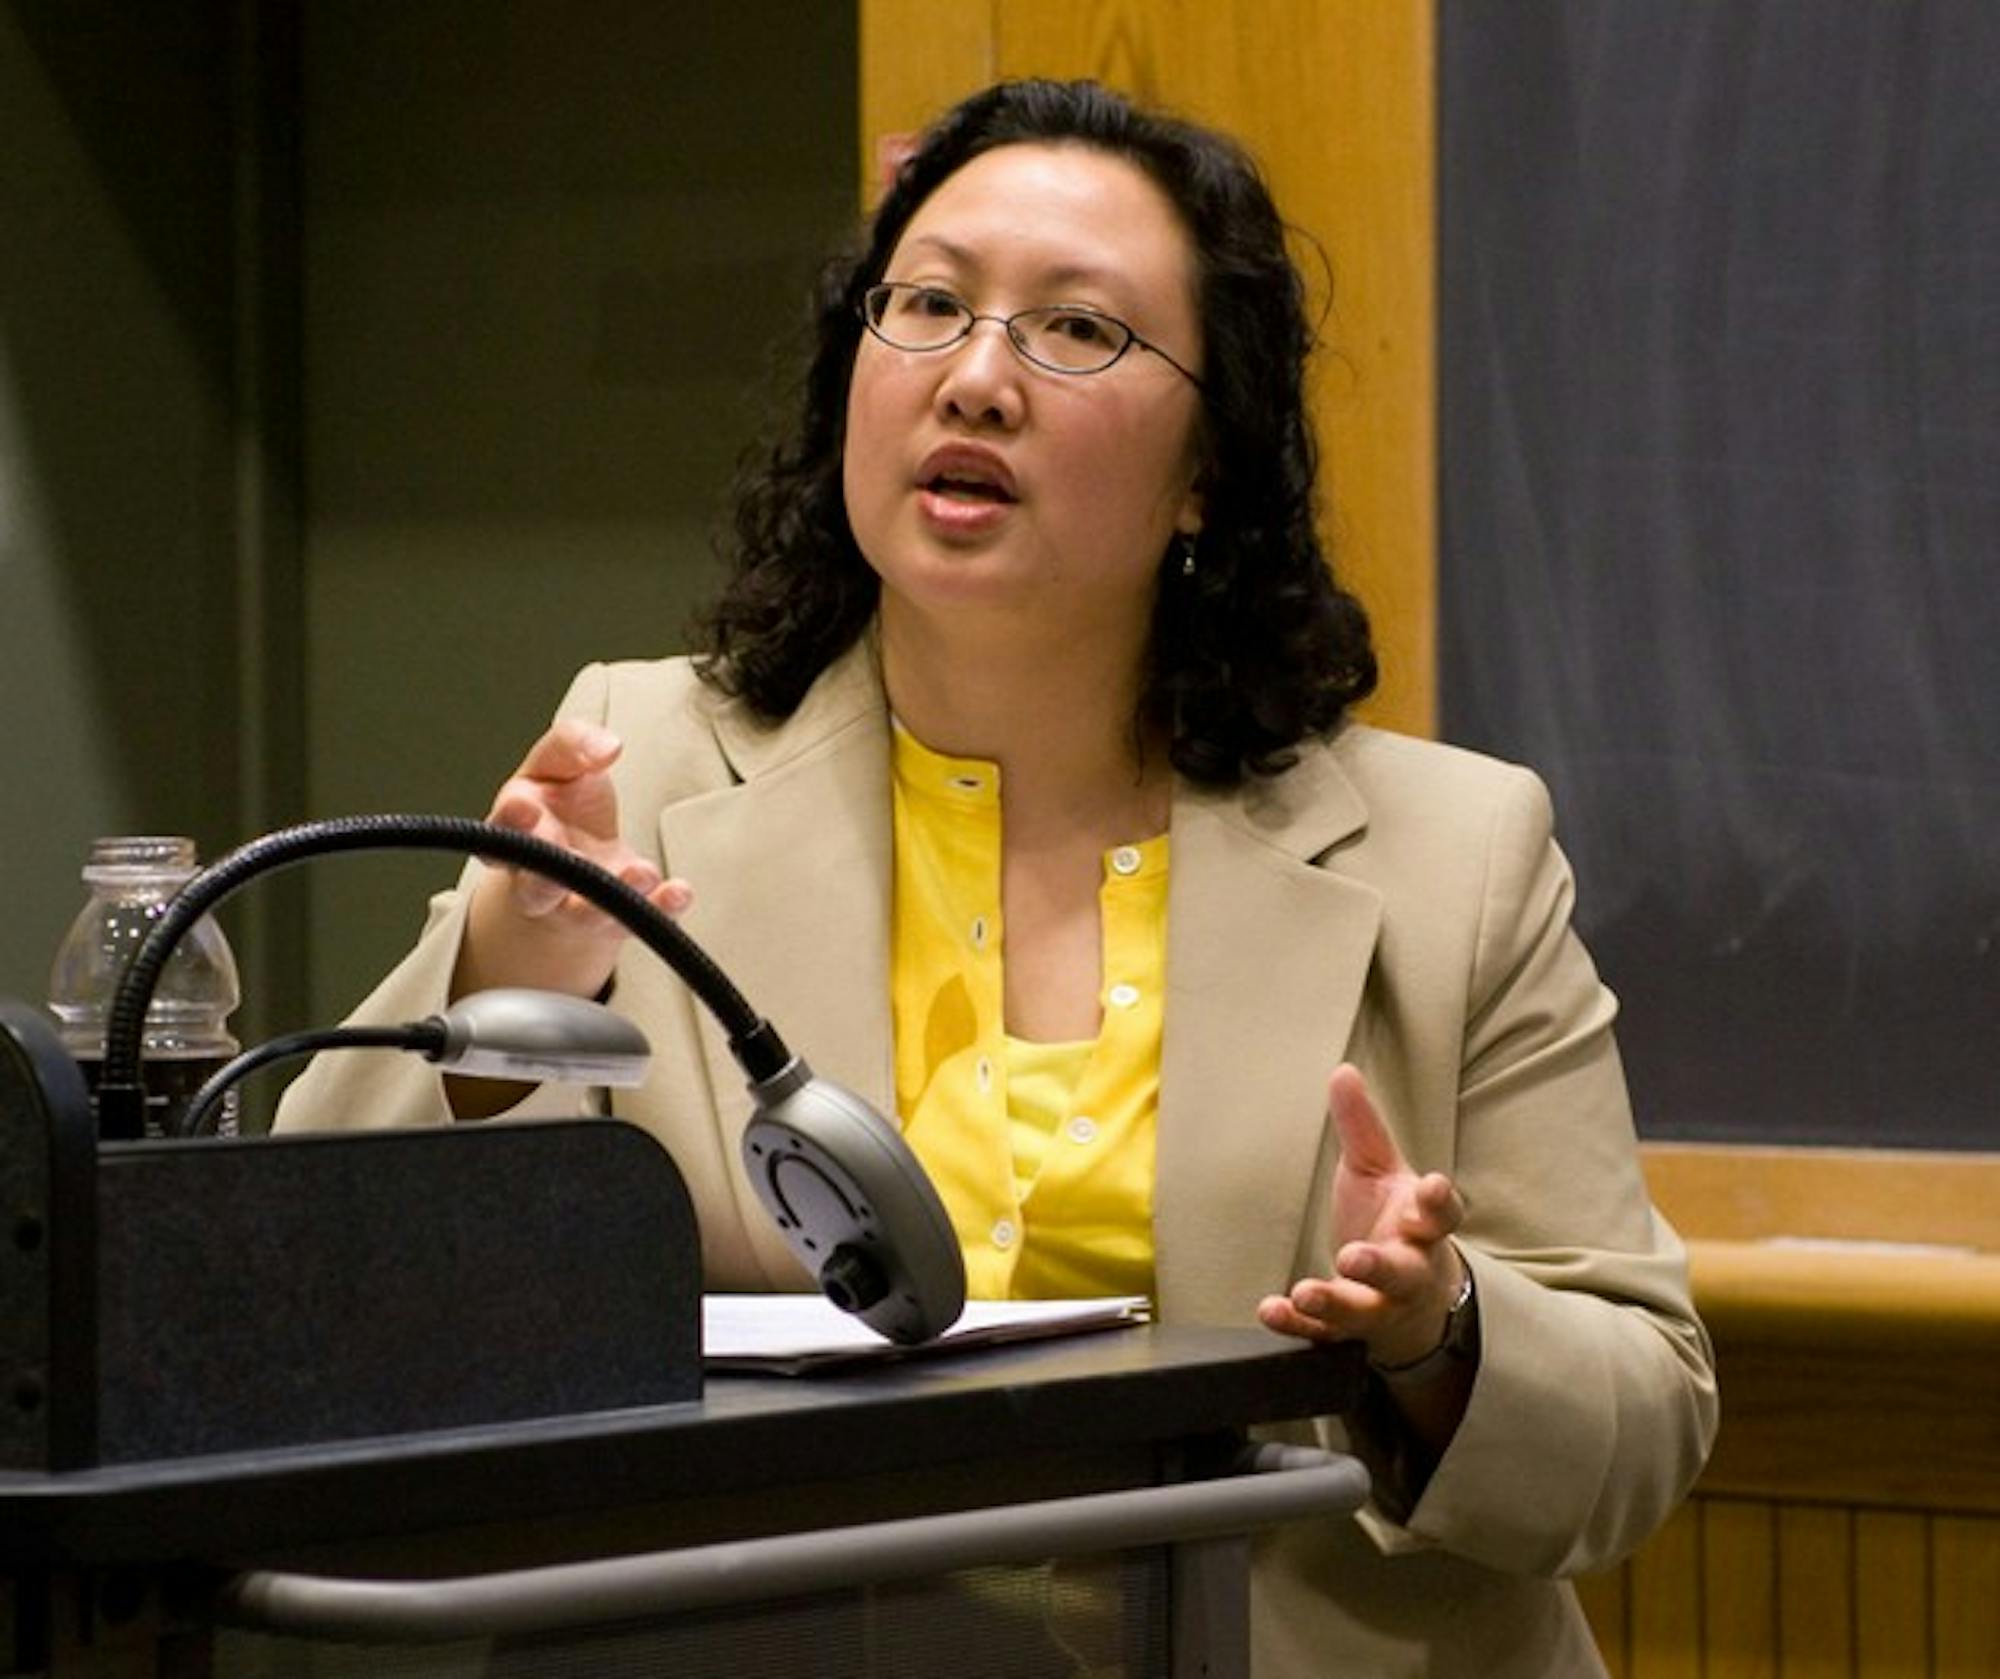 Anna Hui, the first Asian American Associate Deputy Secretary of Labor, encouraged students to explore different careers in a lecture on Monday.